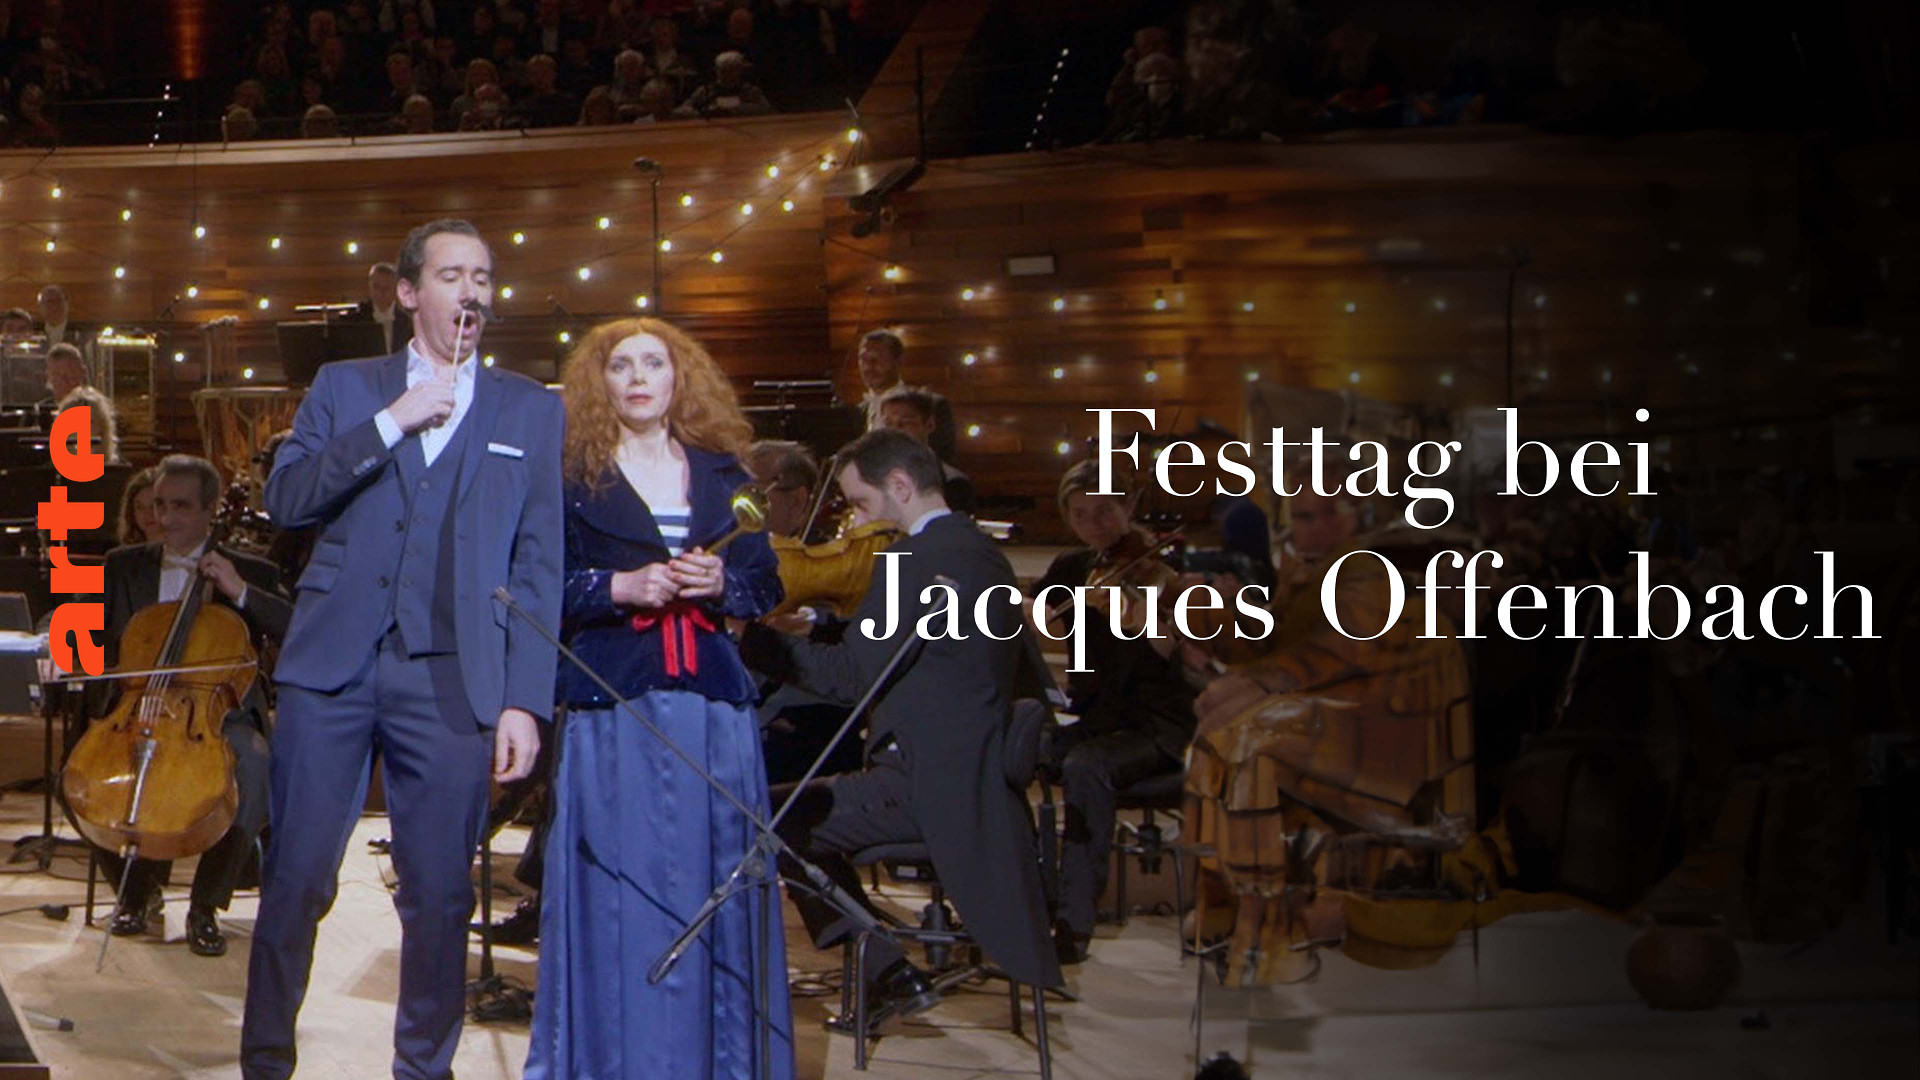 Festtag bei Jacques Offenbach